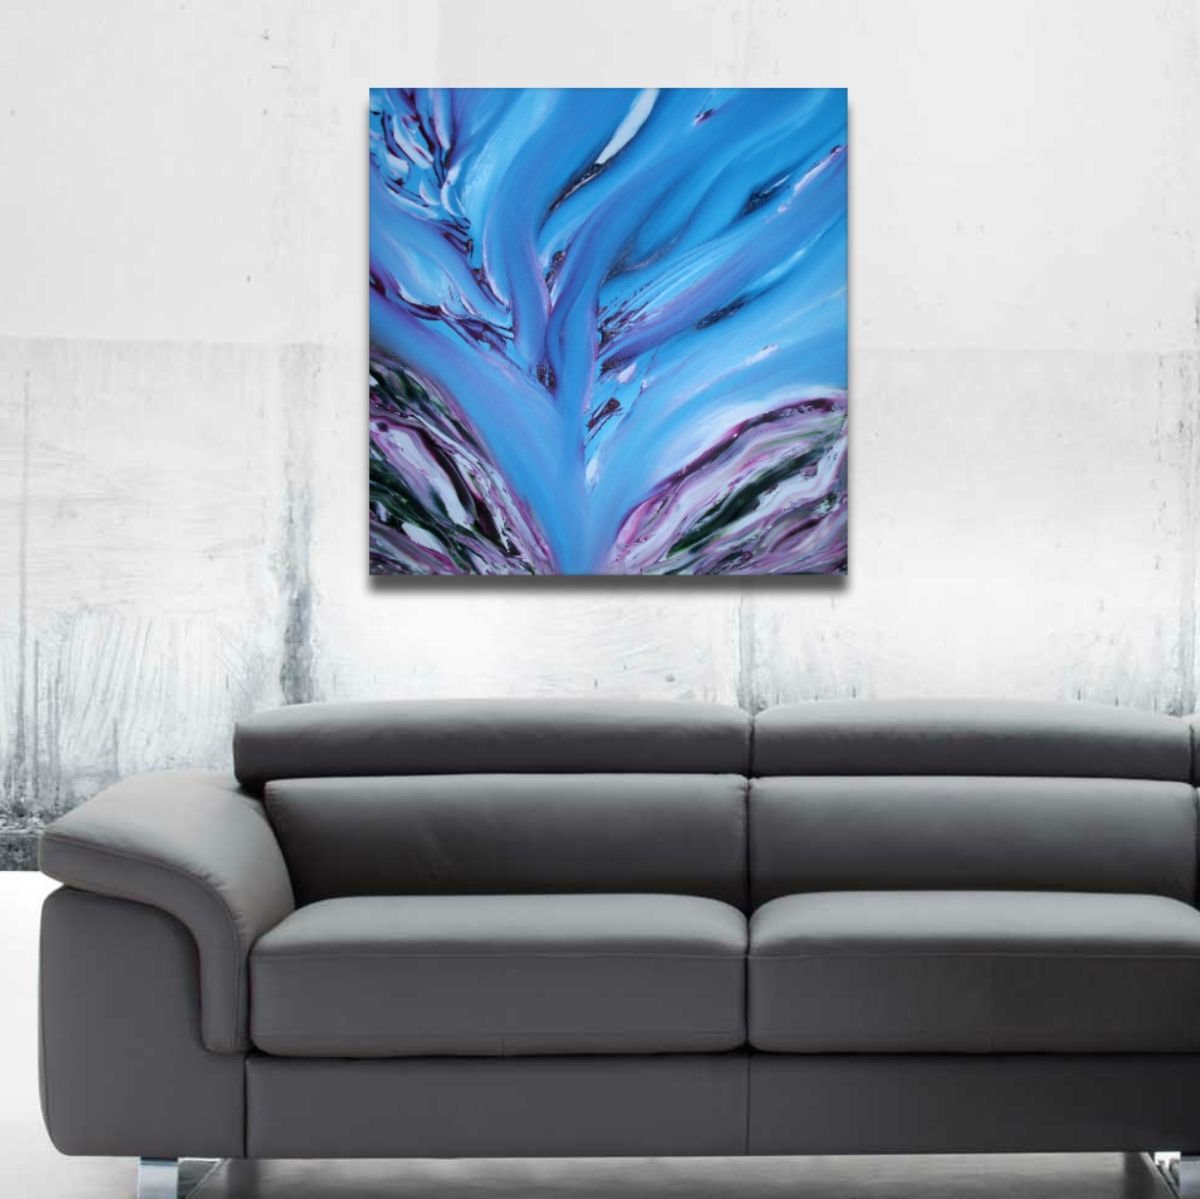 Sinuous torment - 50x50 cm, Original abstract painting, oil on canvas by Davide De Palma